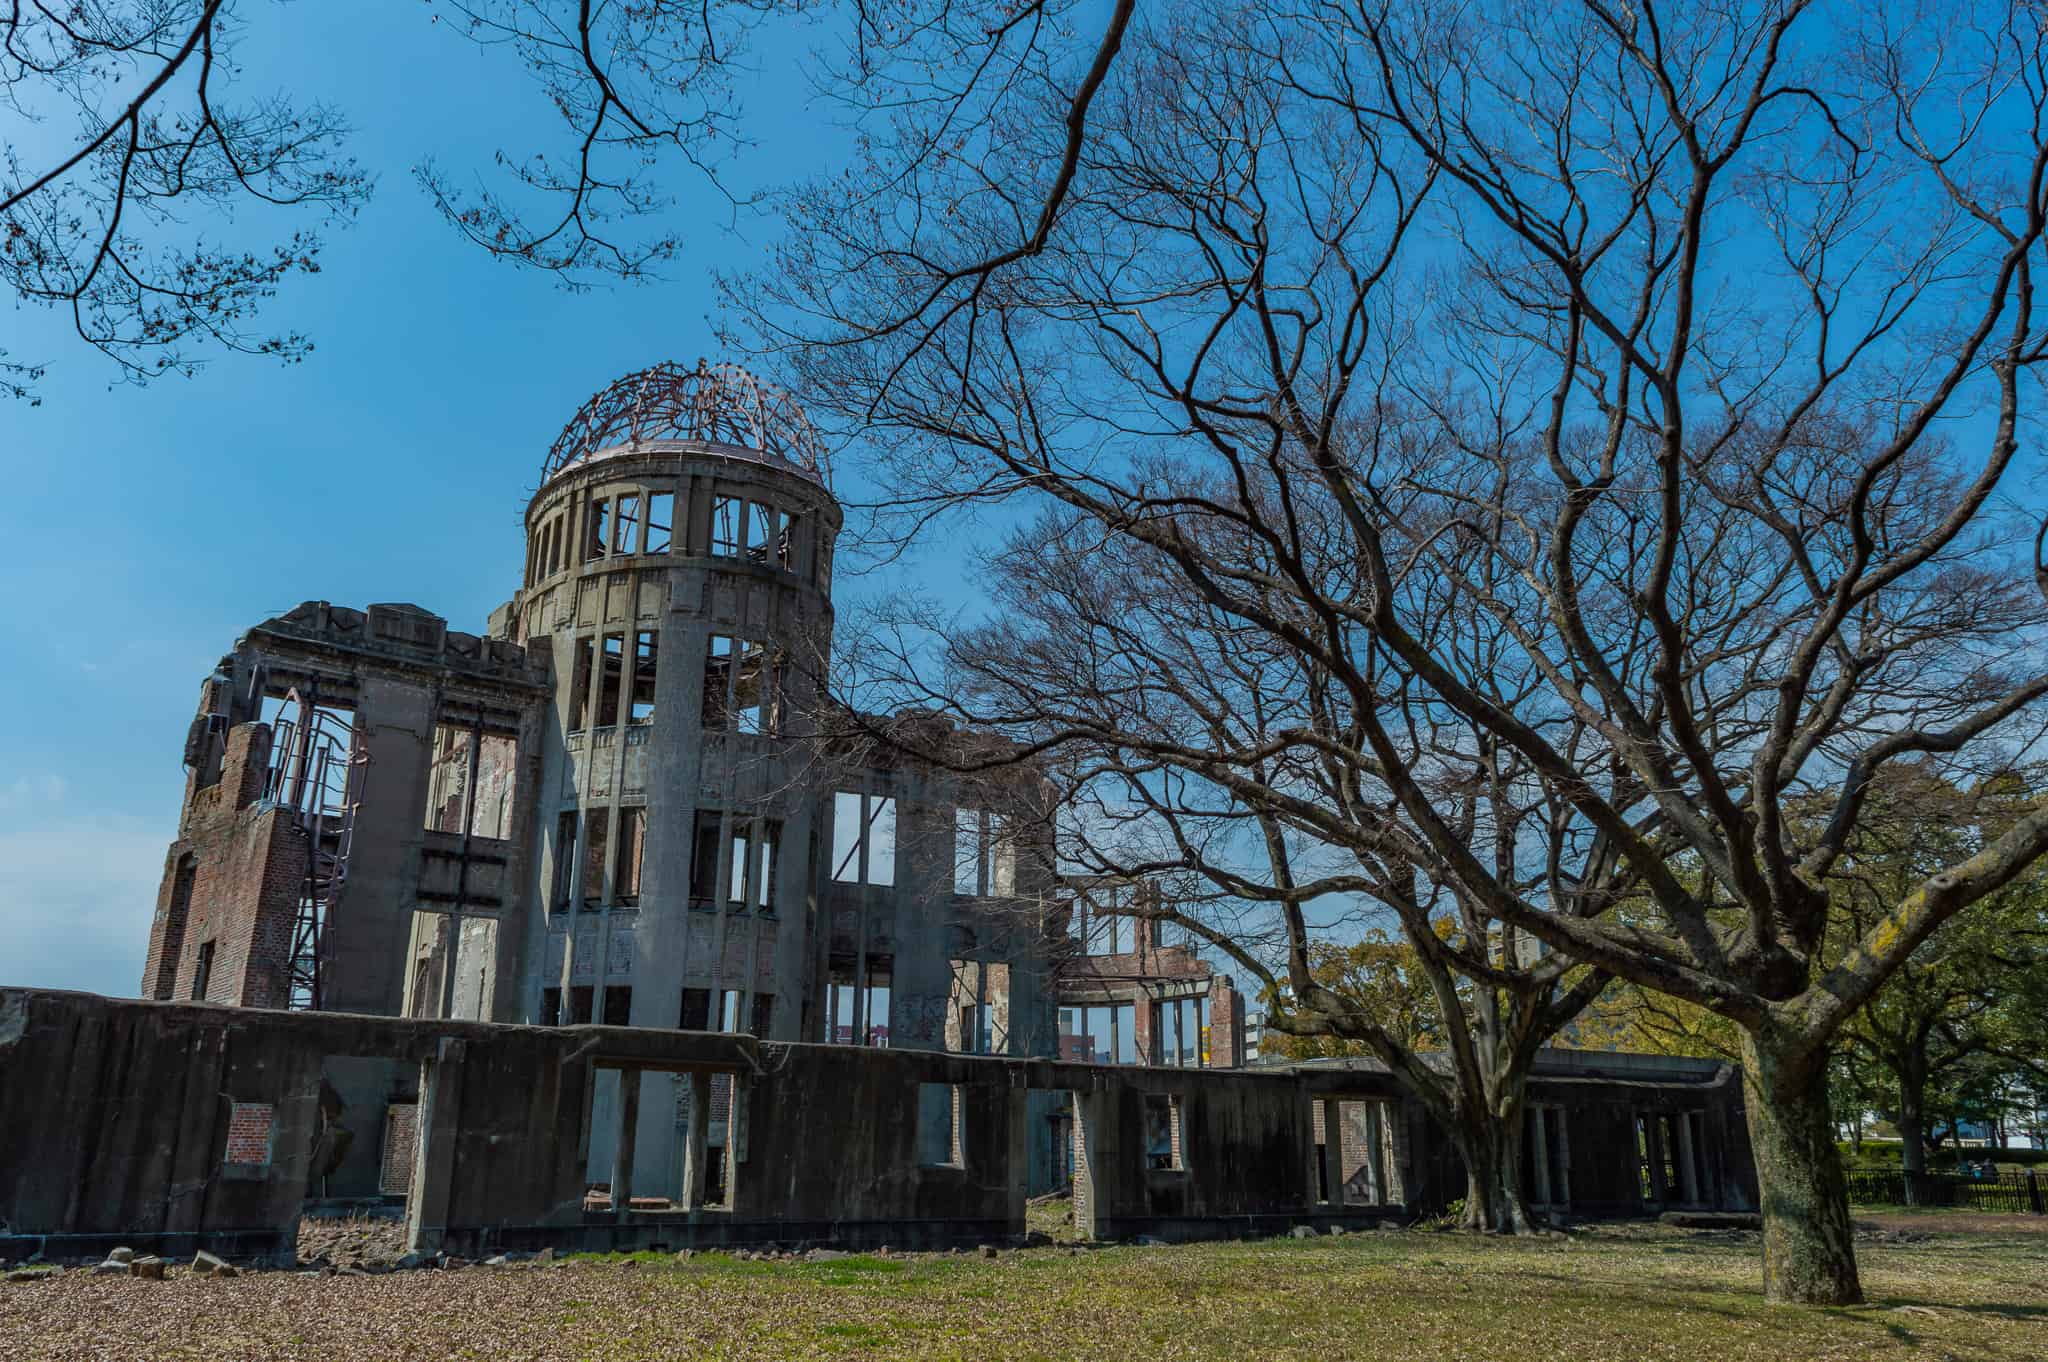 Genbaku Dome is the only building left standing within the atoic bomb's hypocenter